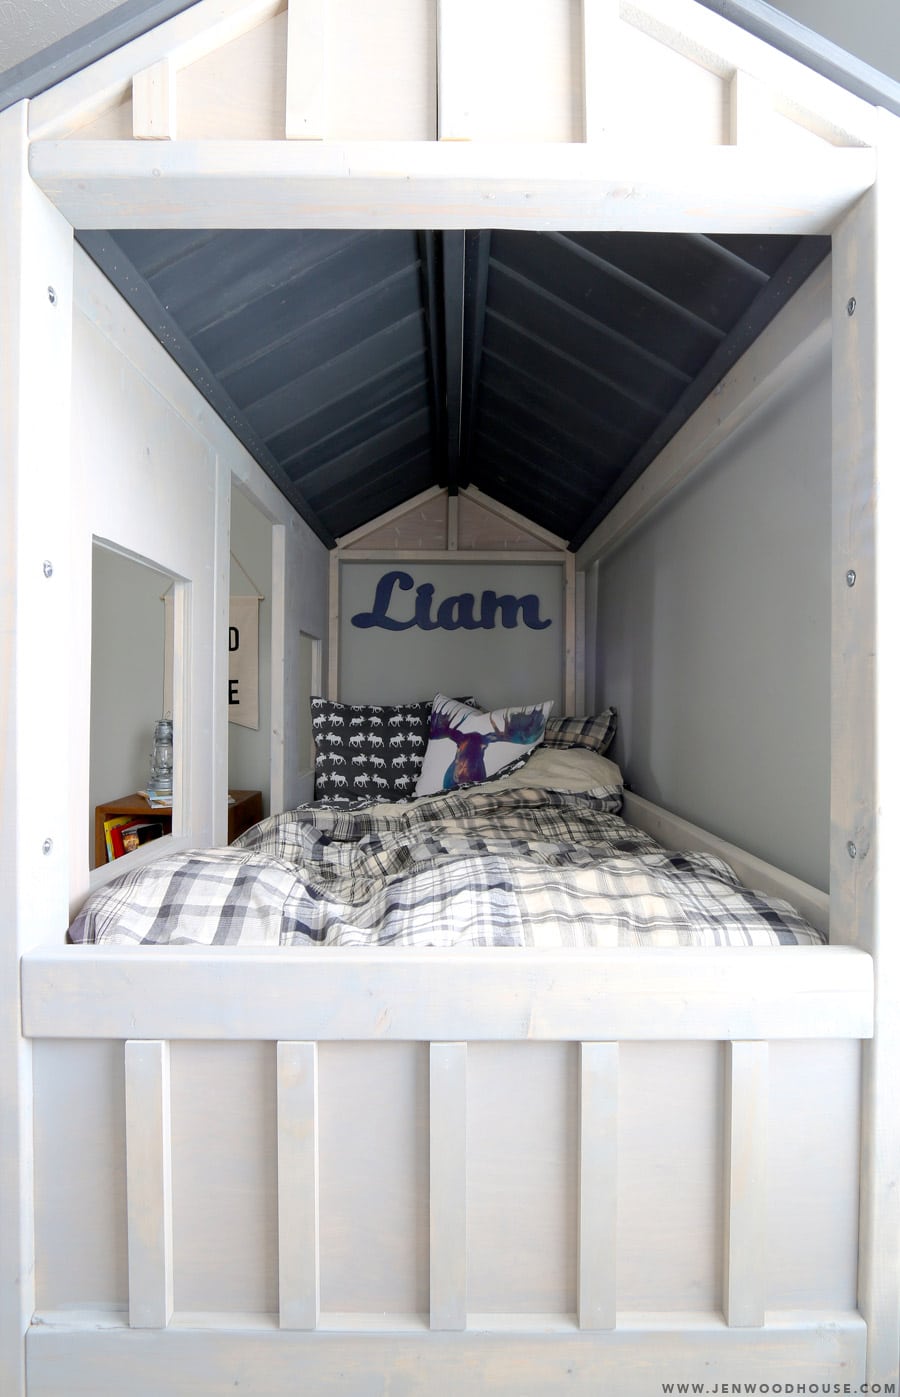 How to build a DIY cabin bed